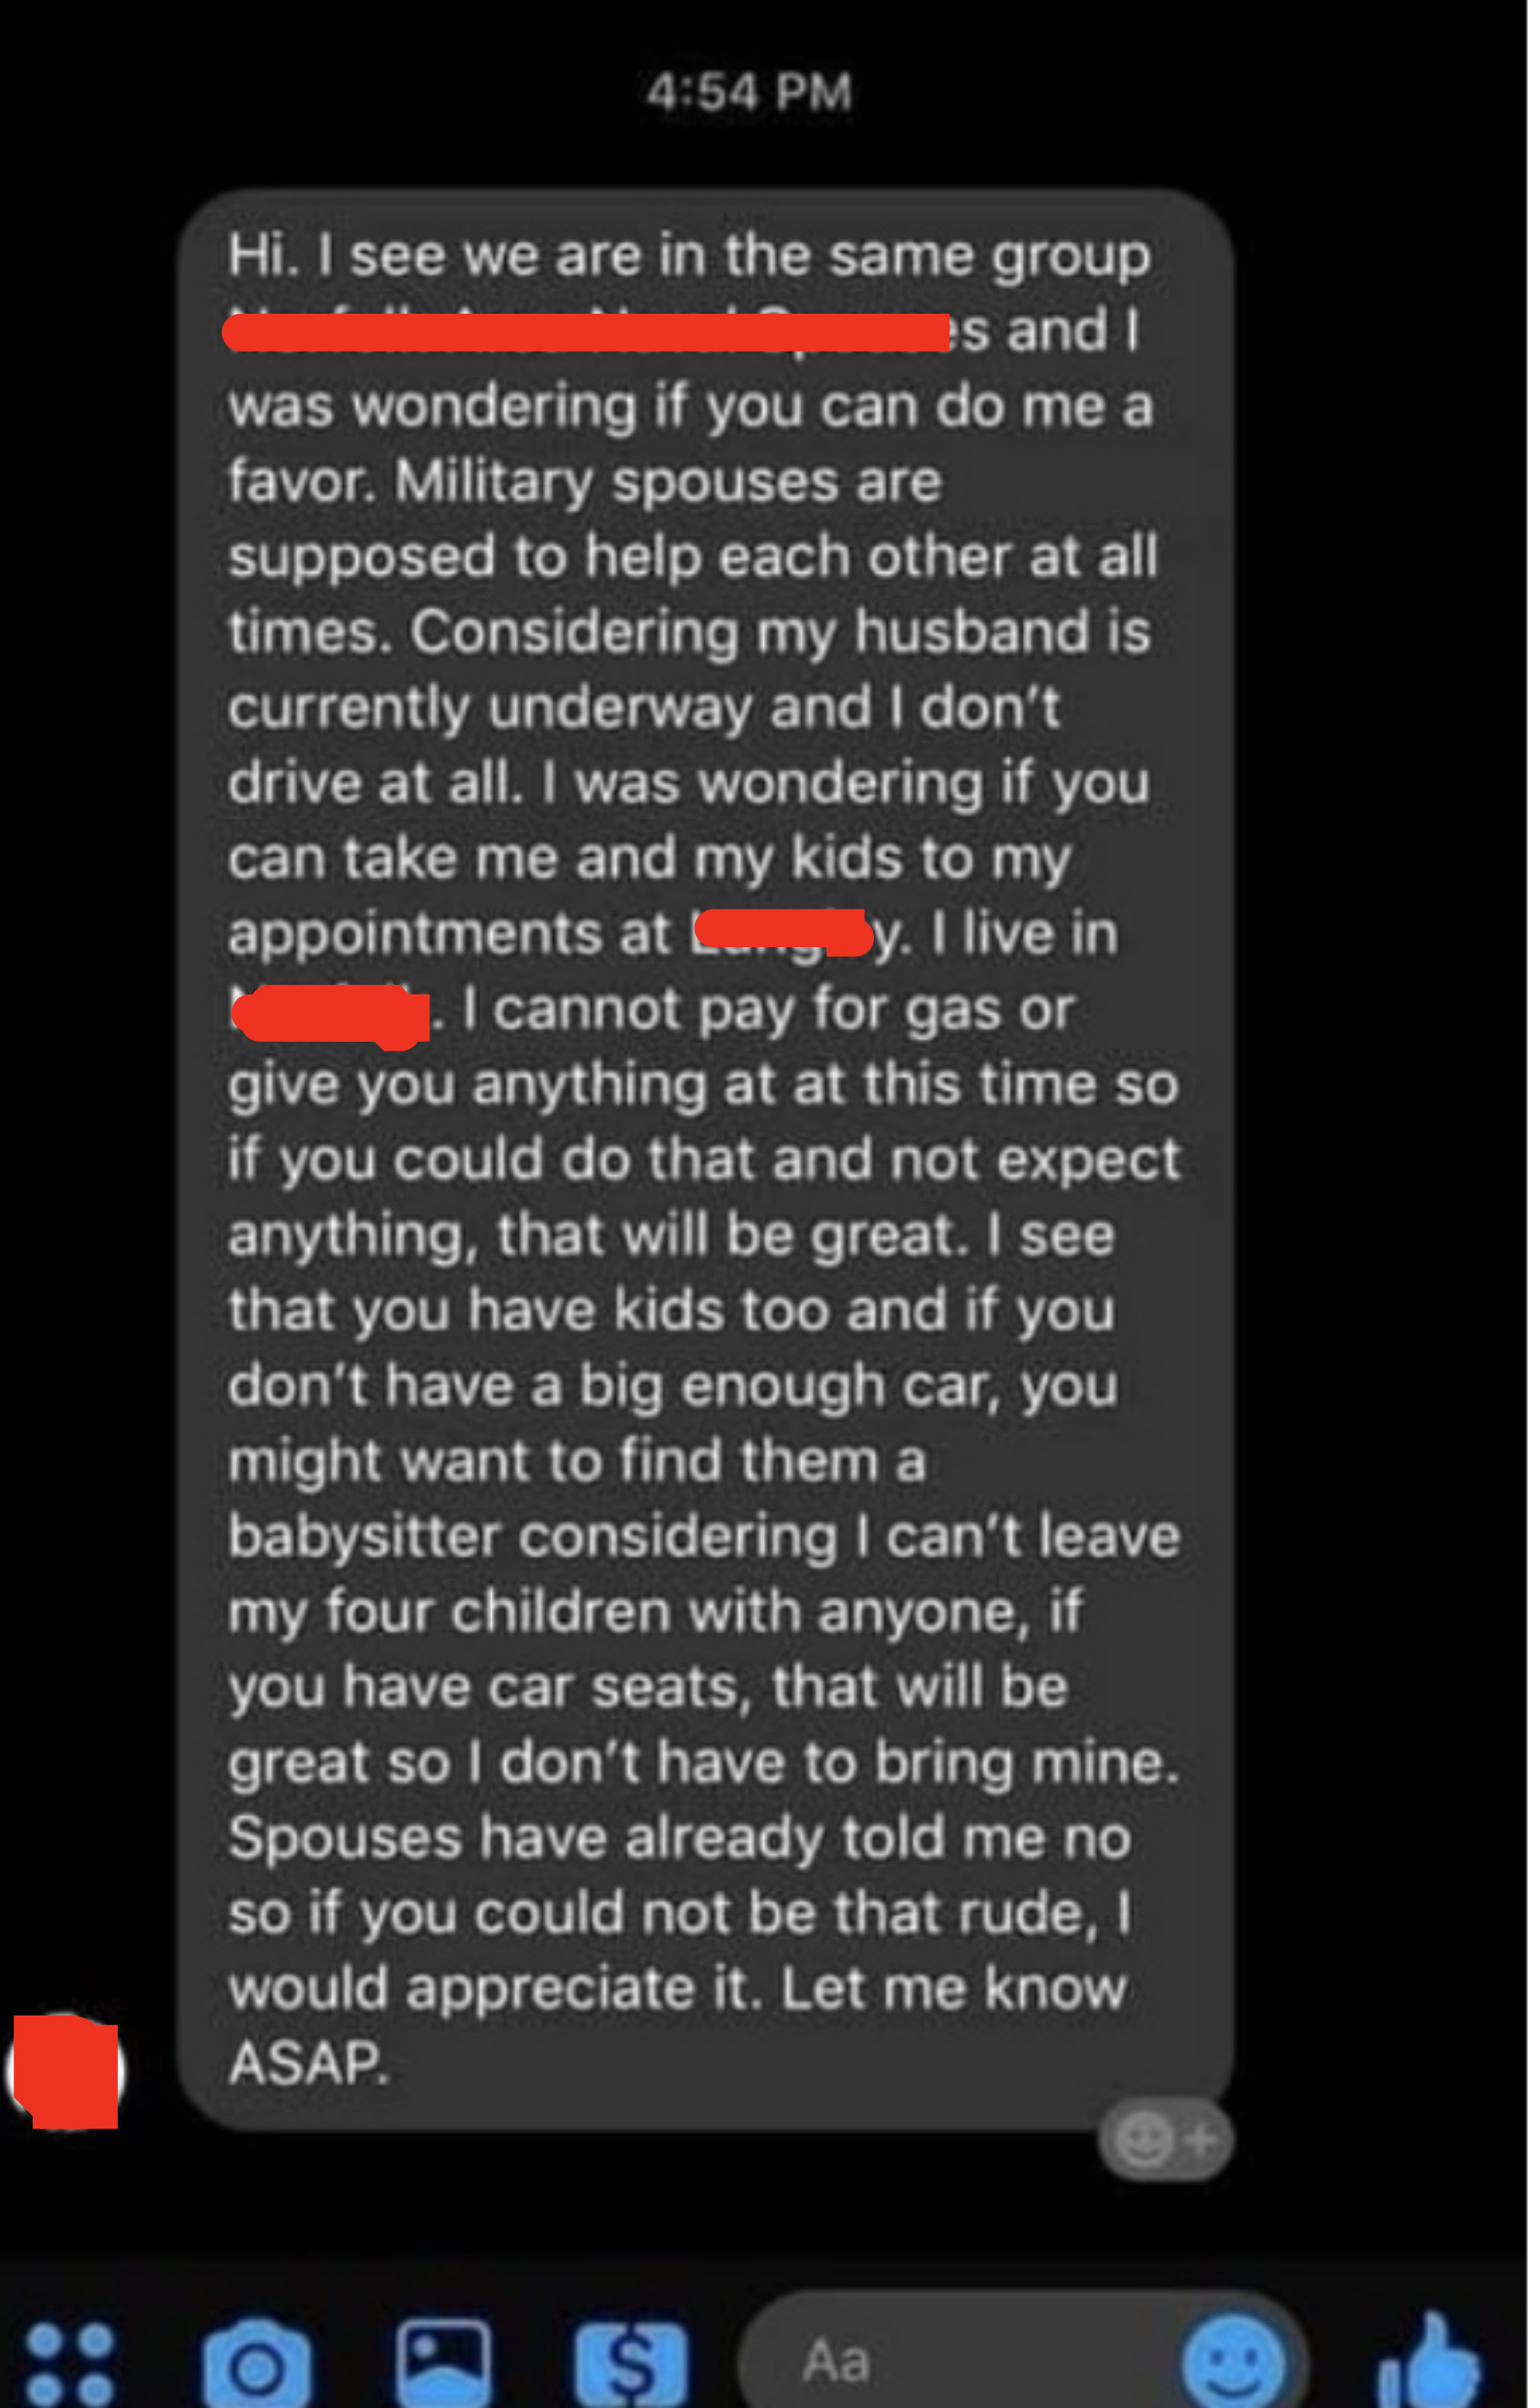 military spouse asking another if they could be driven to their appointments but will not be helping with gas and saying that military spouses are supposed to help each always so dont be rude